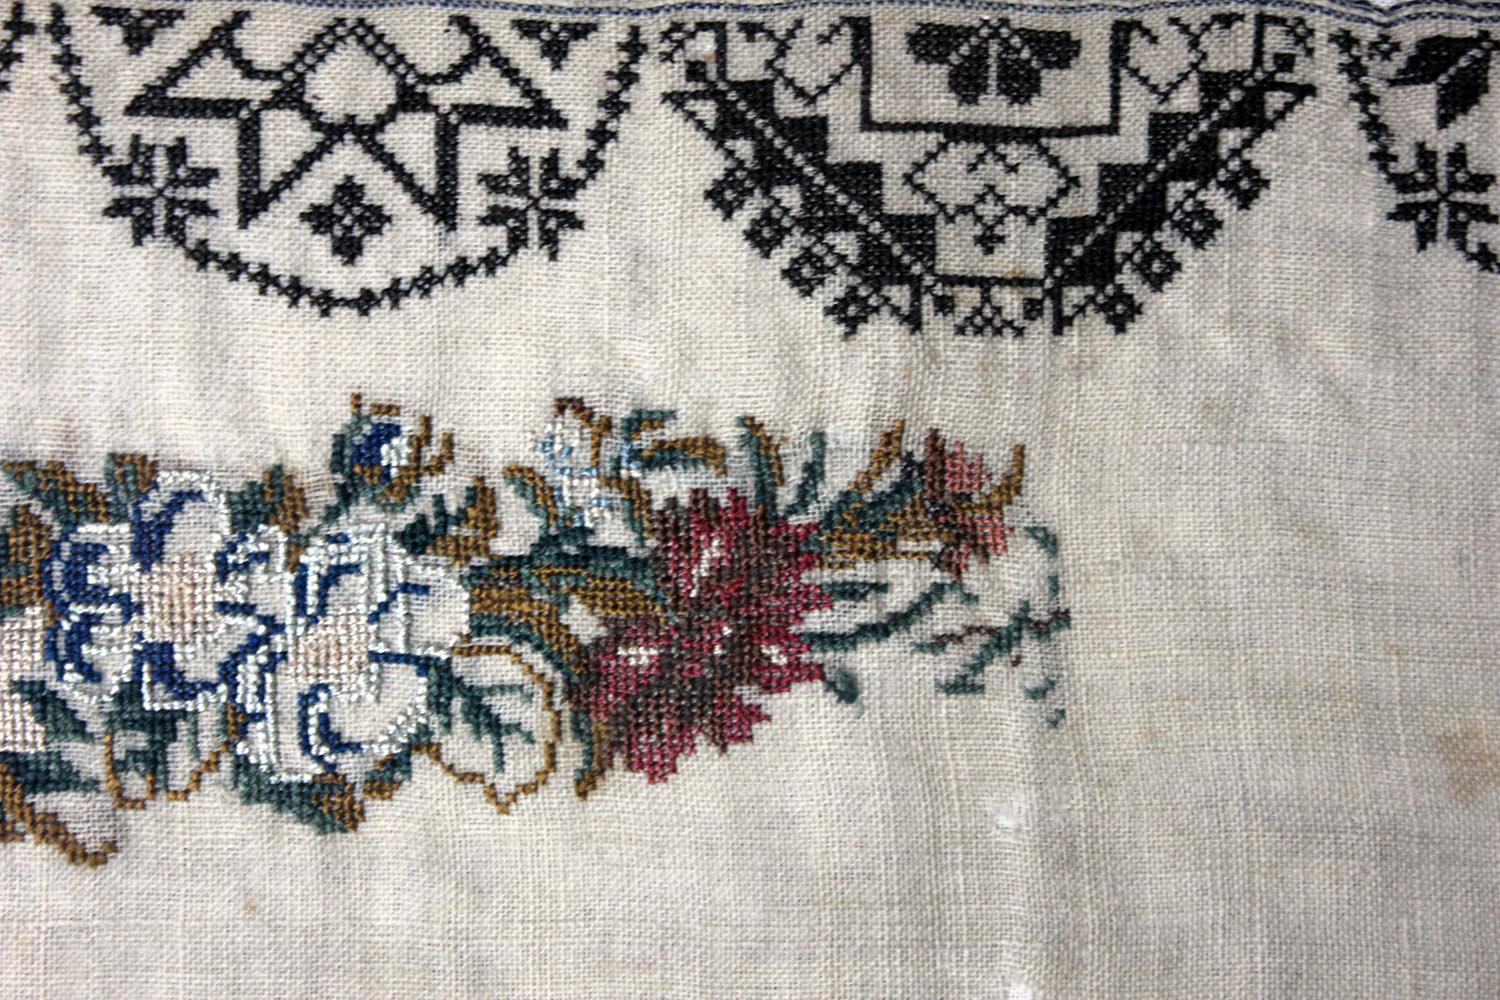 English Poignant George III Period Unfinished Sampler by Margaret Penrose Robinson 1809